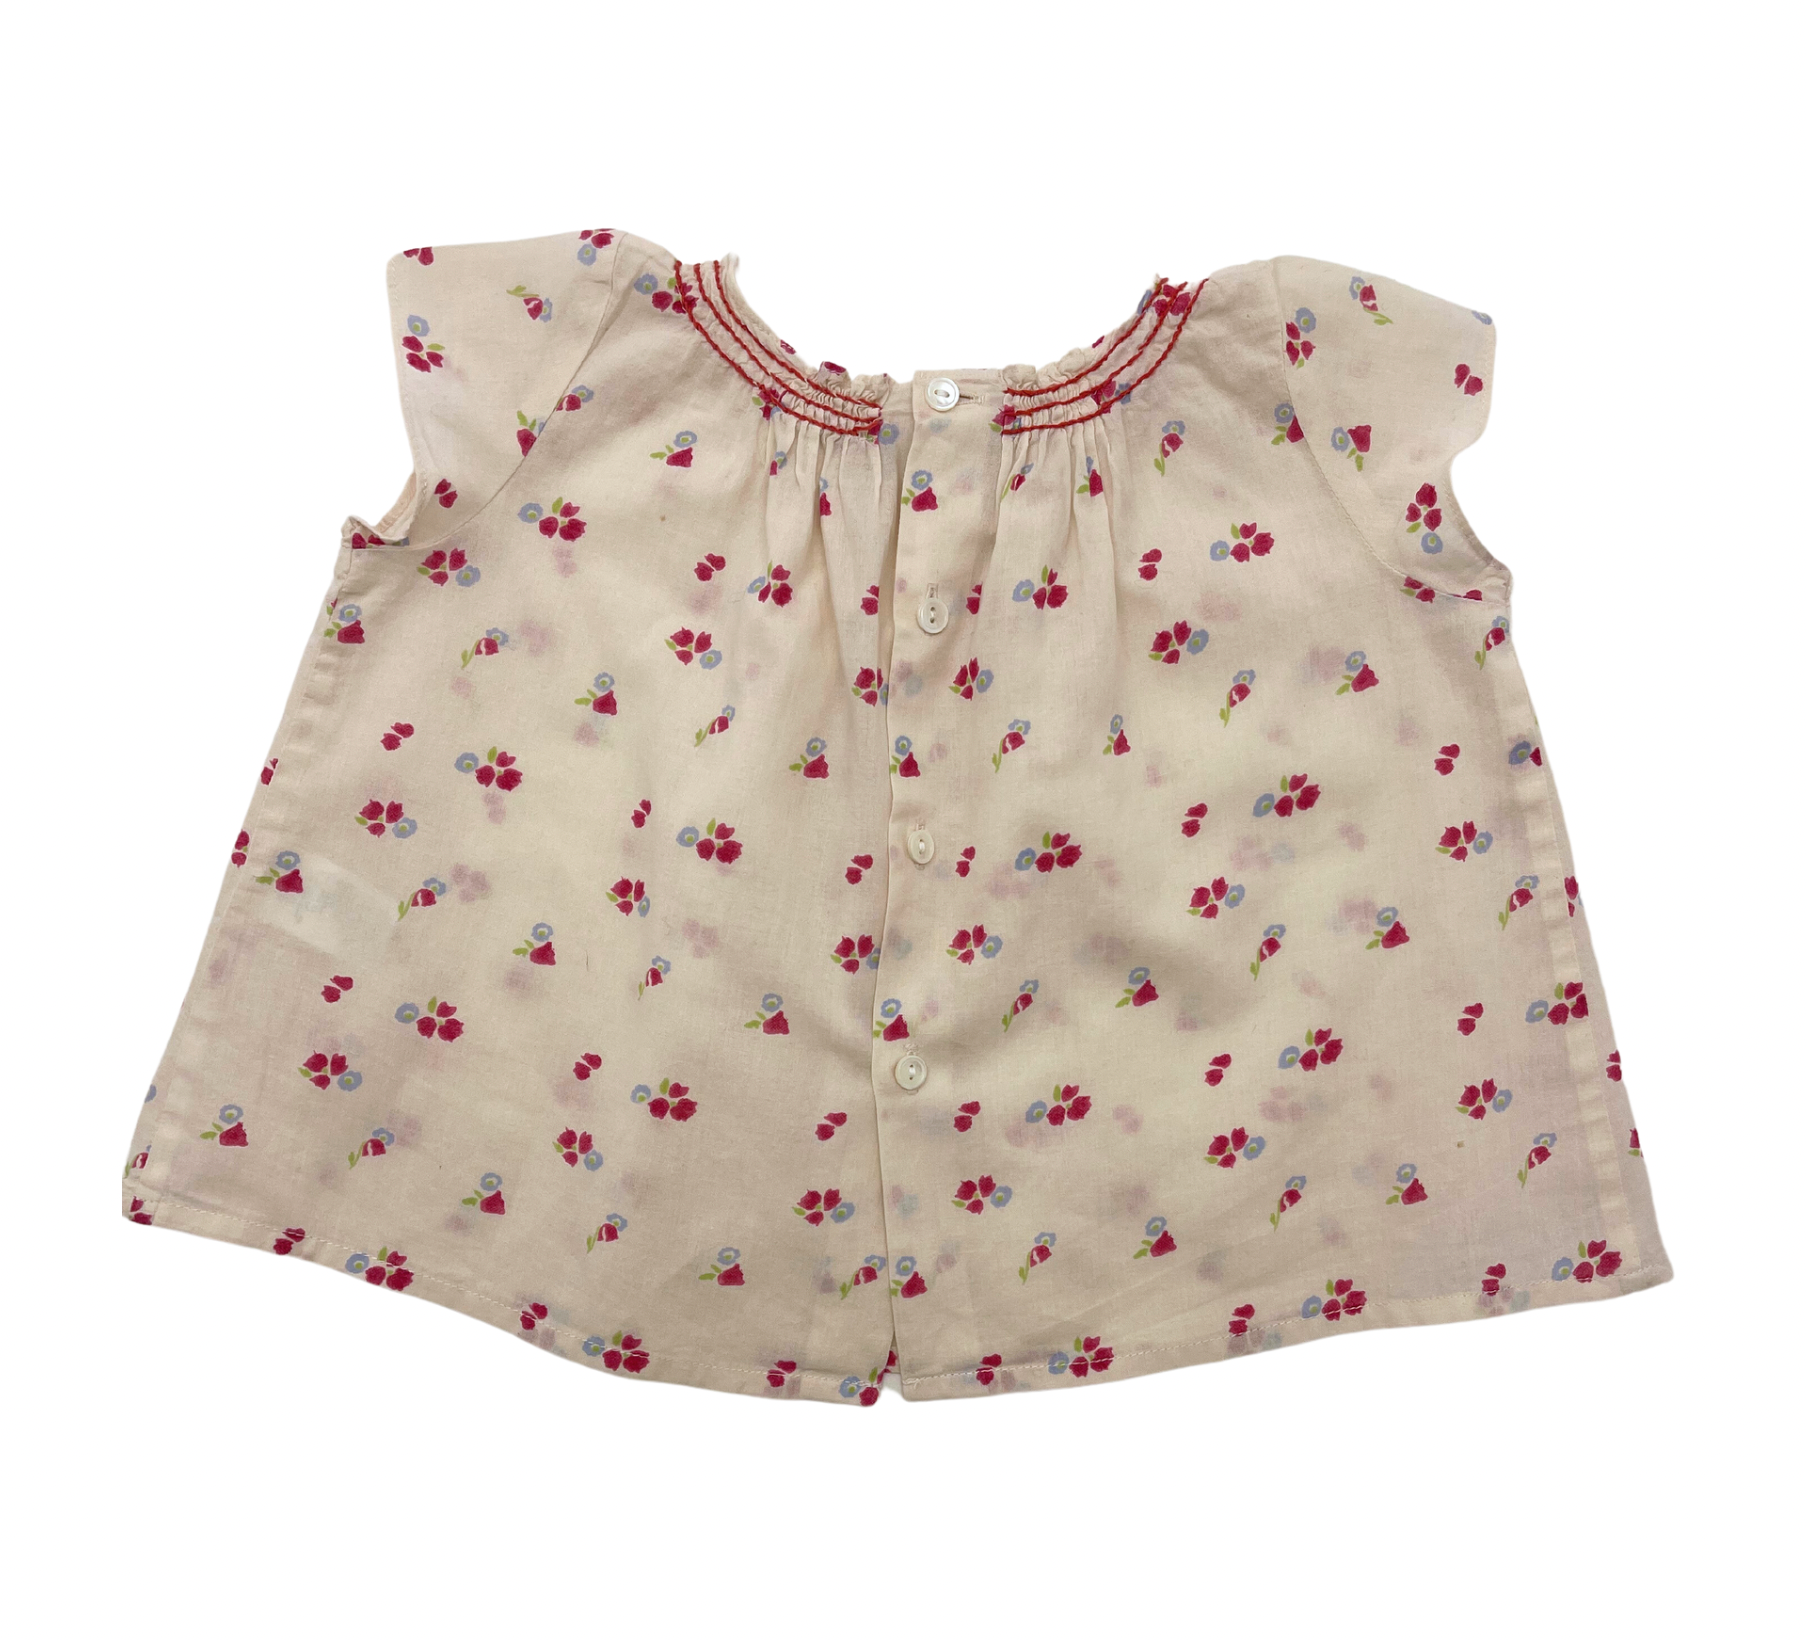 BONPOINT - Floral blouse - 1 year old